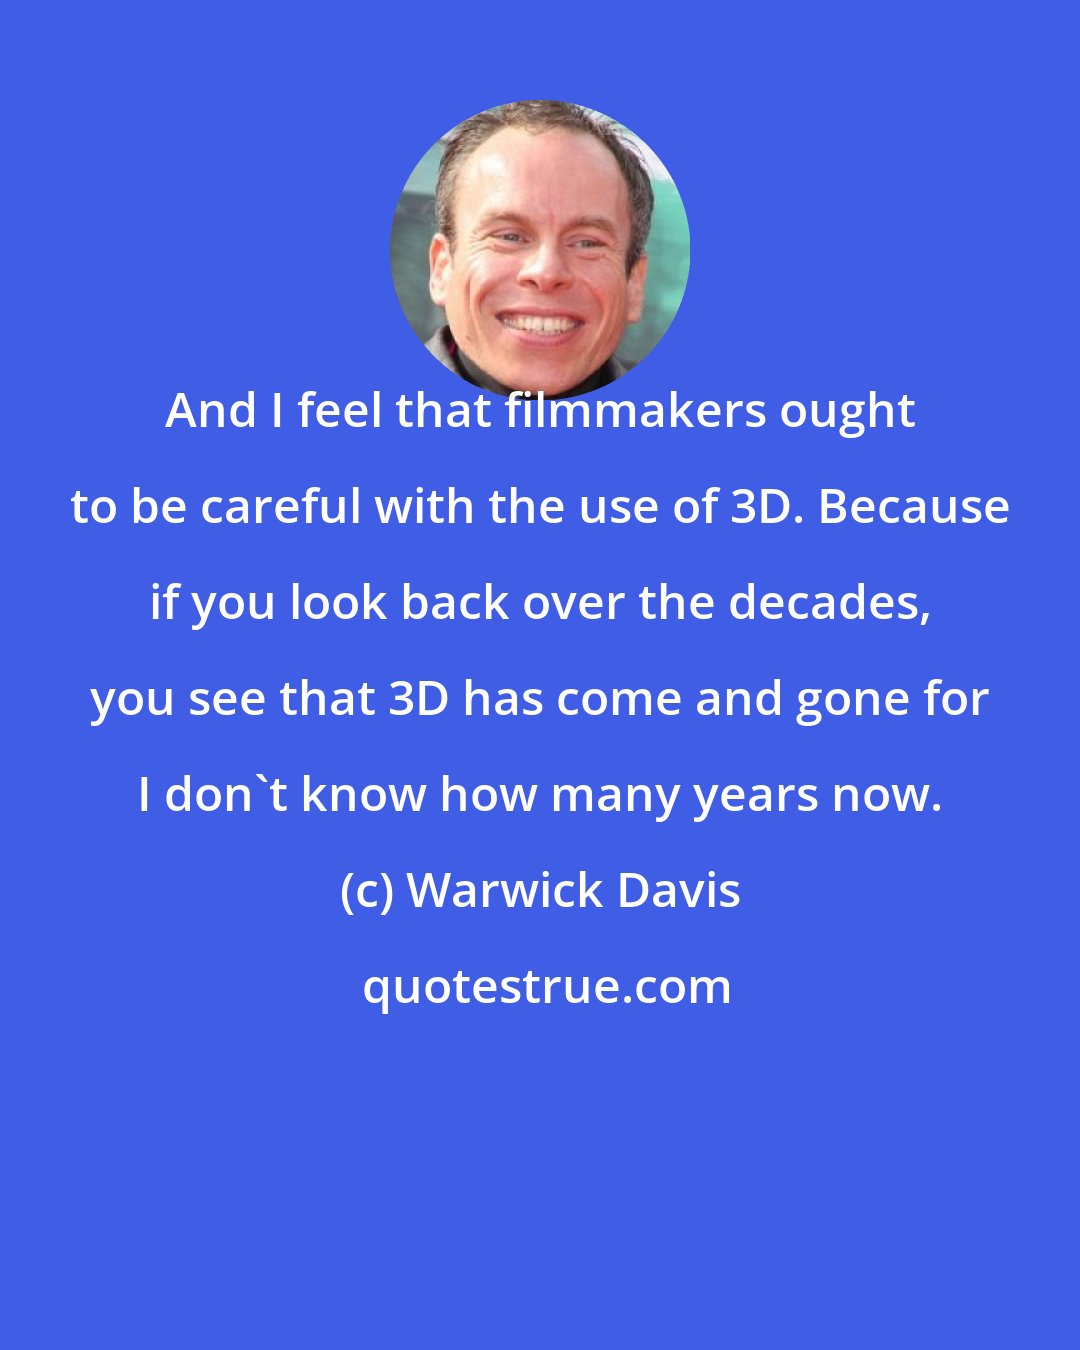 Warwick Davis: And I feel that filmmakers ought to be careful with the use of 3D. Because if you look back over the decades, you see that 3D has come and gone for I don't know how many years now.